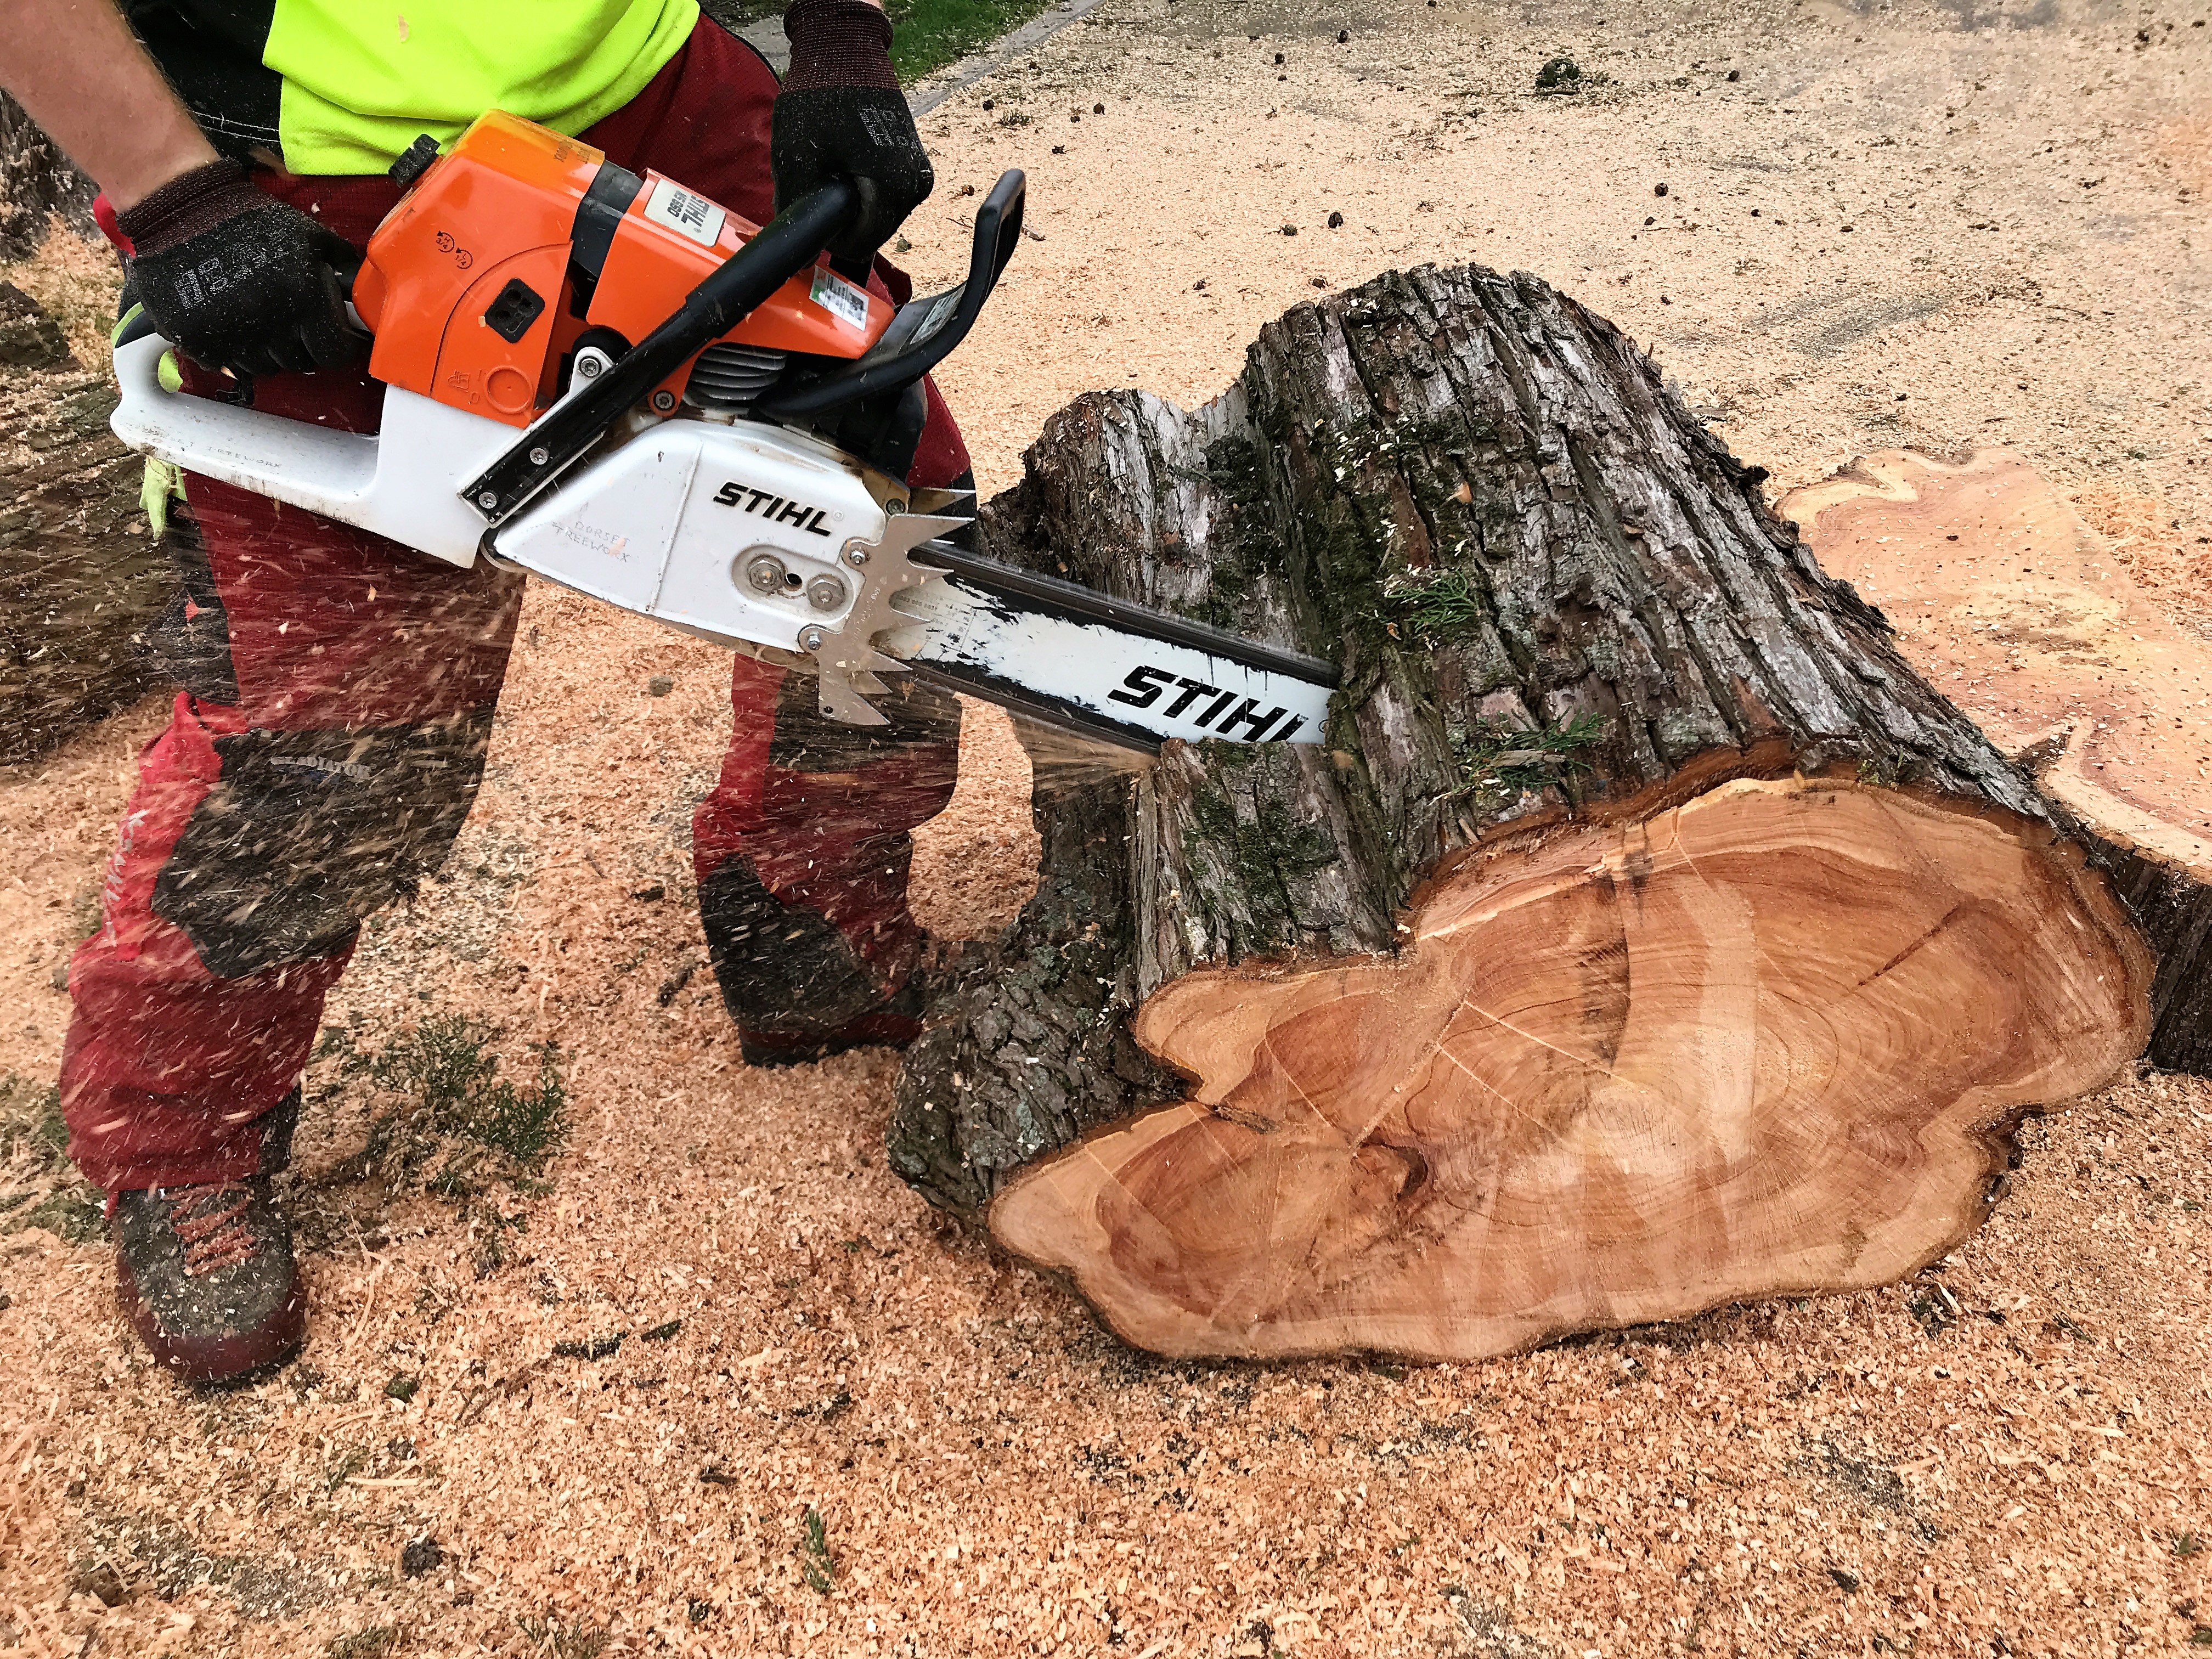 Weymouth Tree Surgeon | Tree removal, tree felling, stump grinding service - tree surgeon cutting a large tree with a chainsaw into sections to remove.